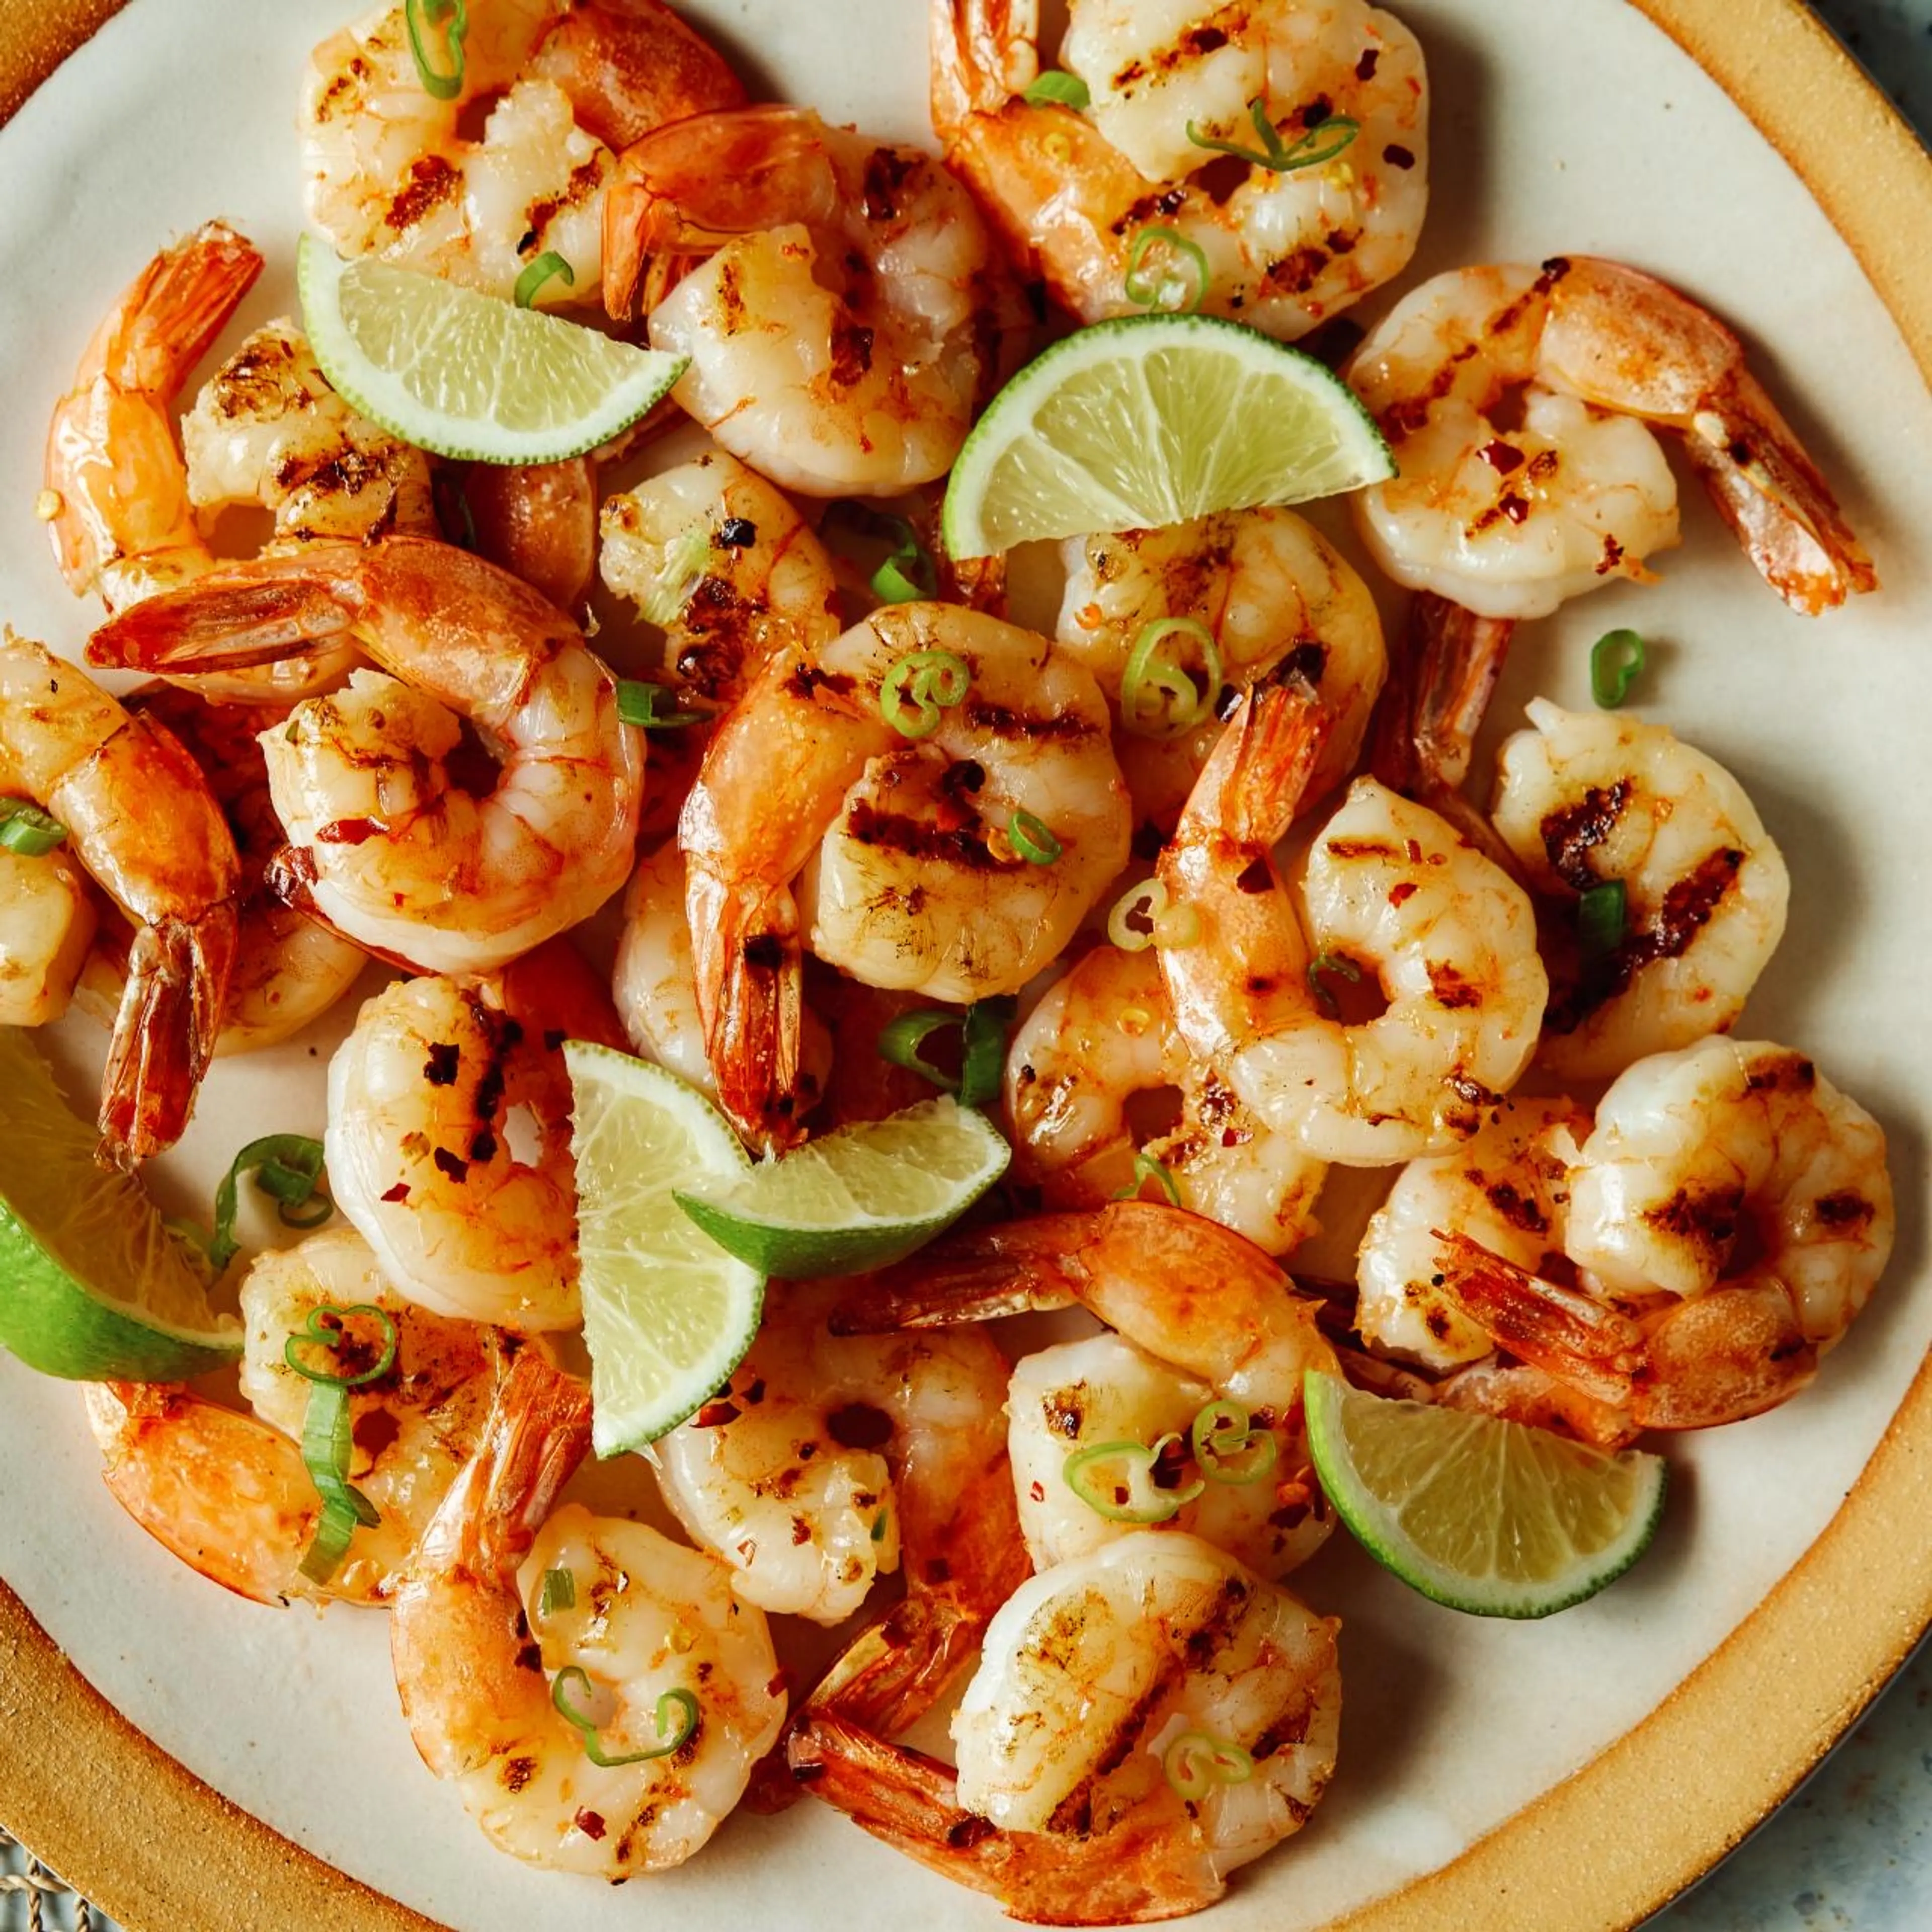 Coconut-Lime Marinated and Grilled Shrimp